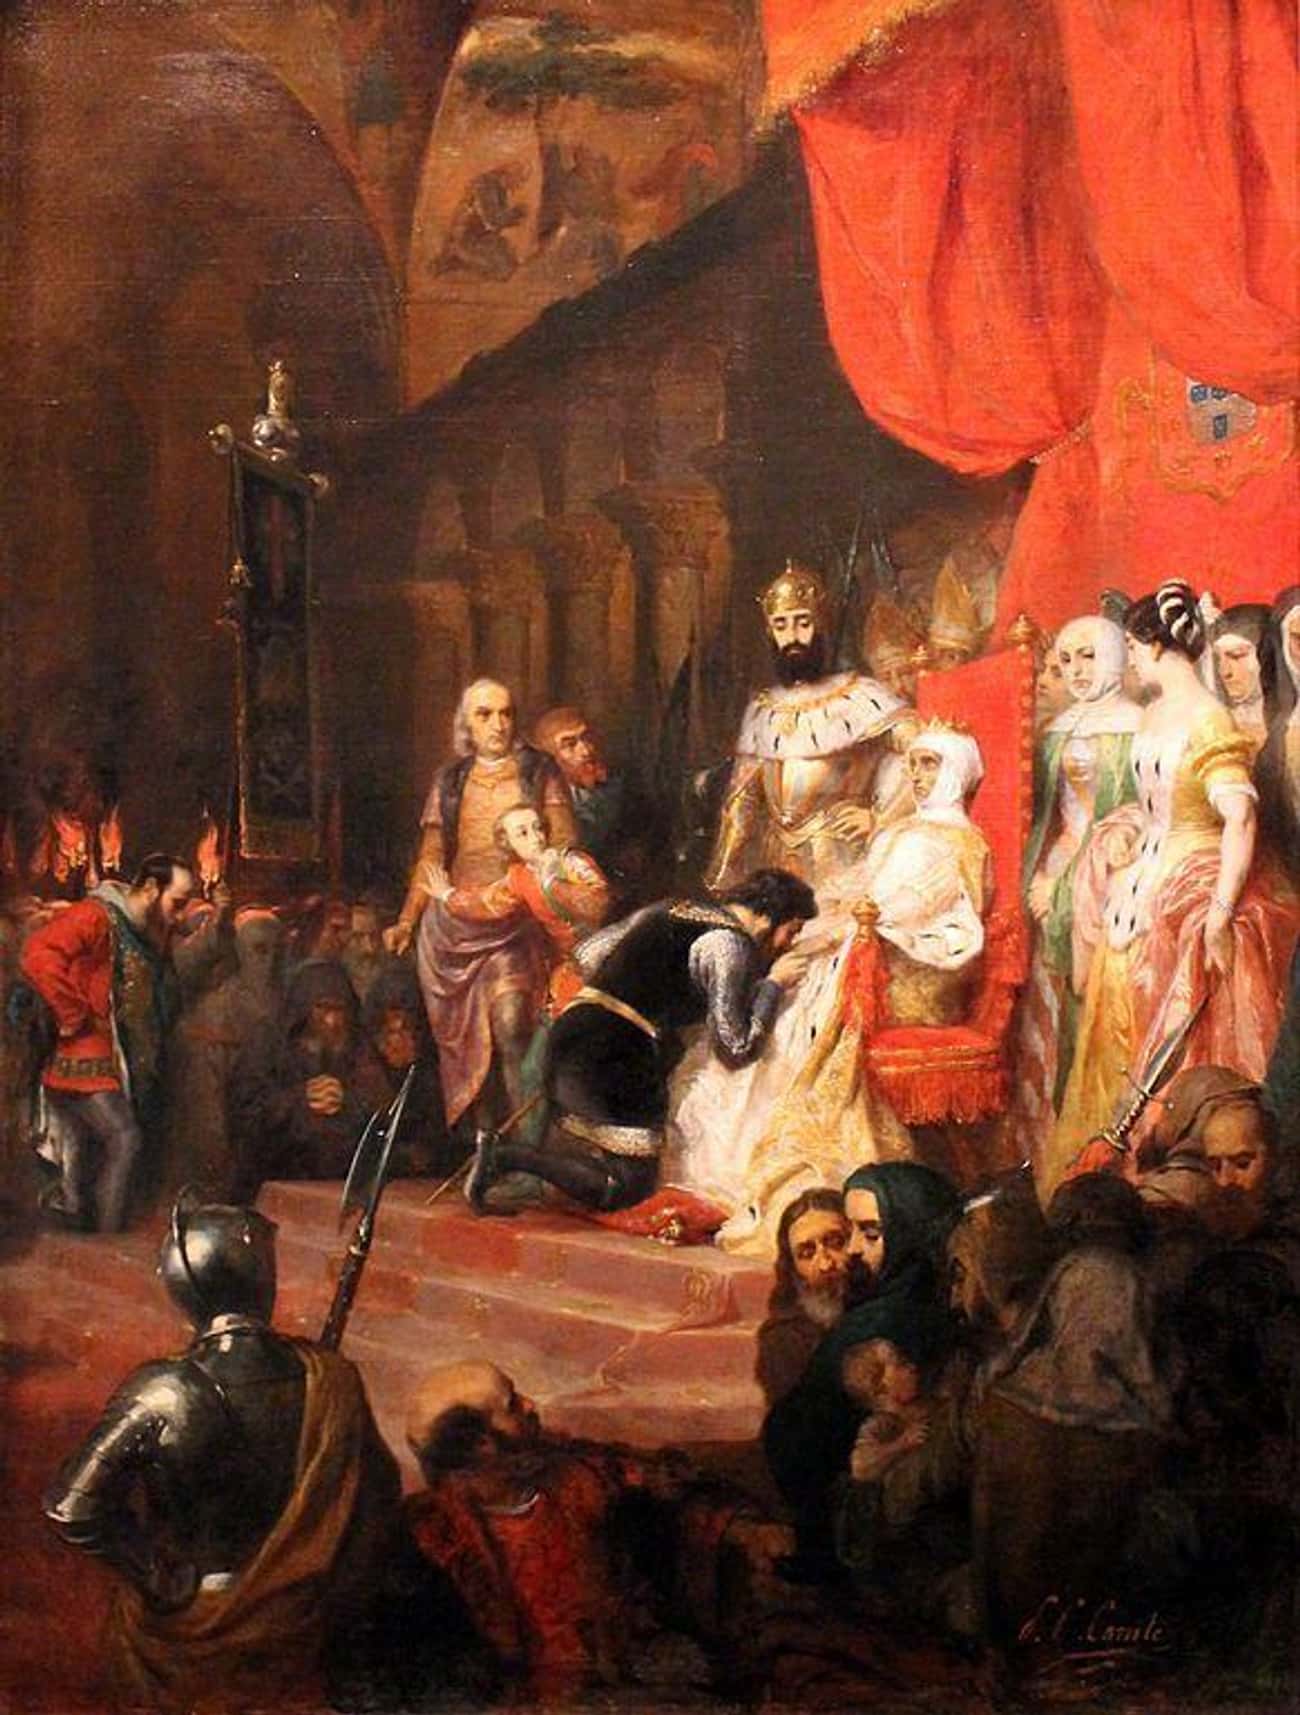 When Peter I Of Portugal Became King, He Dug Up His Dead Lover